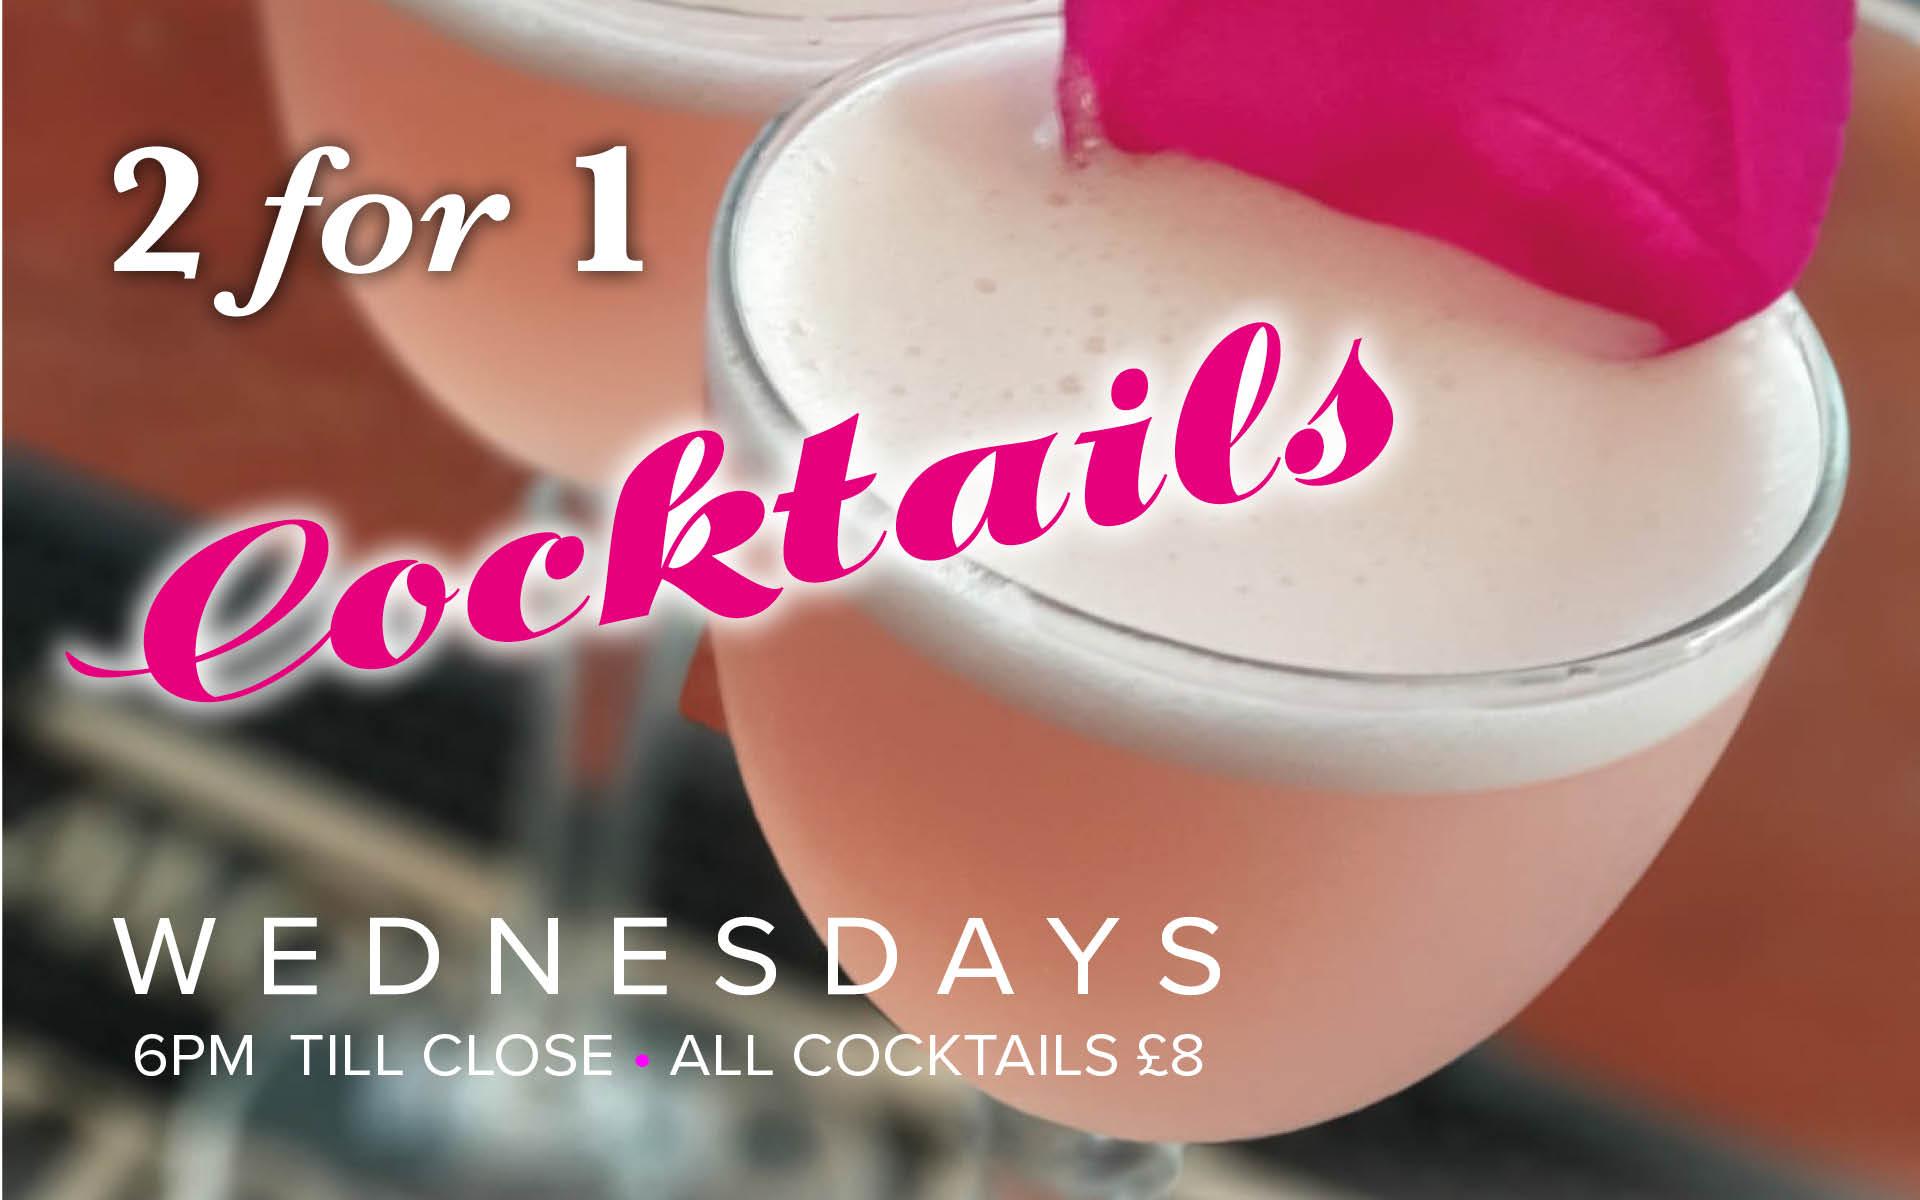 2 for 1 cocktails every Wednesday